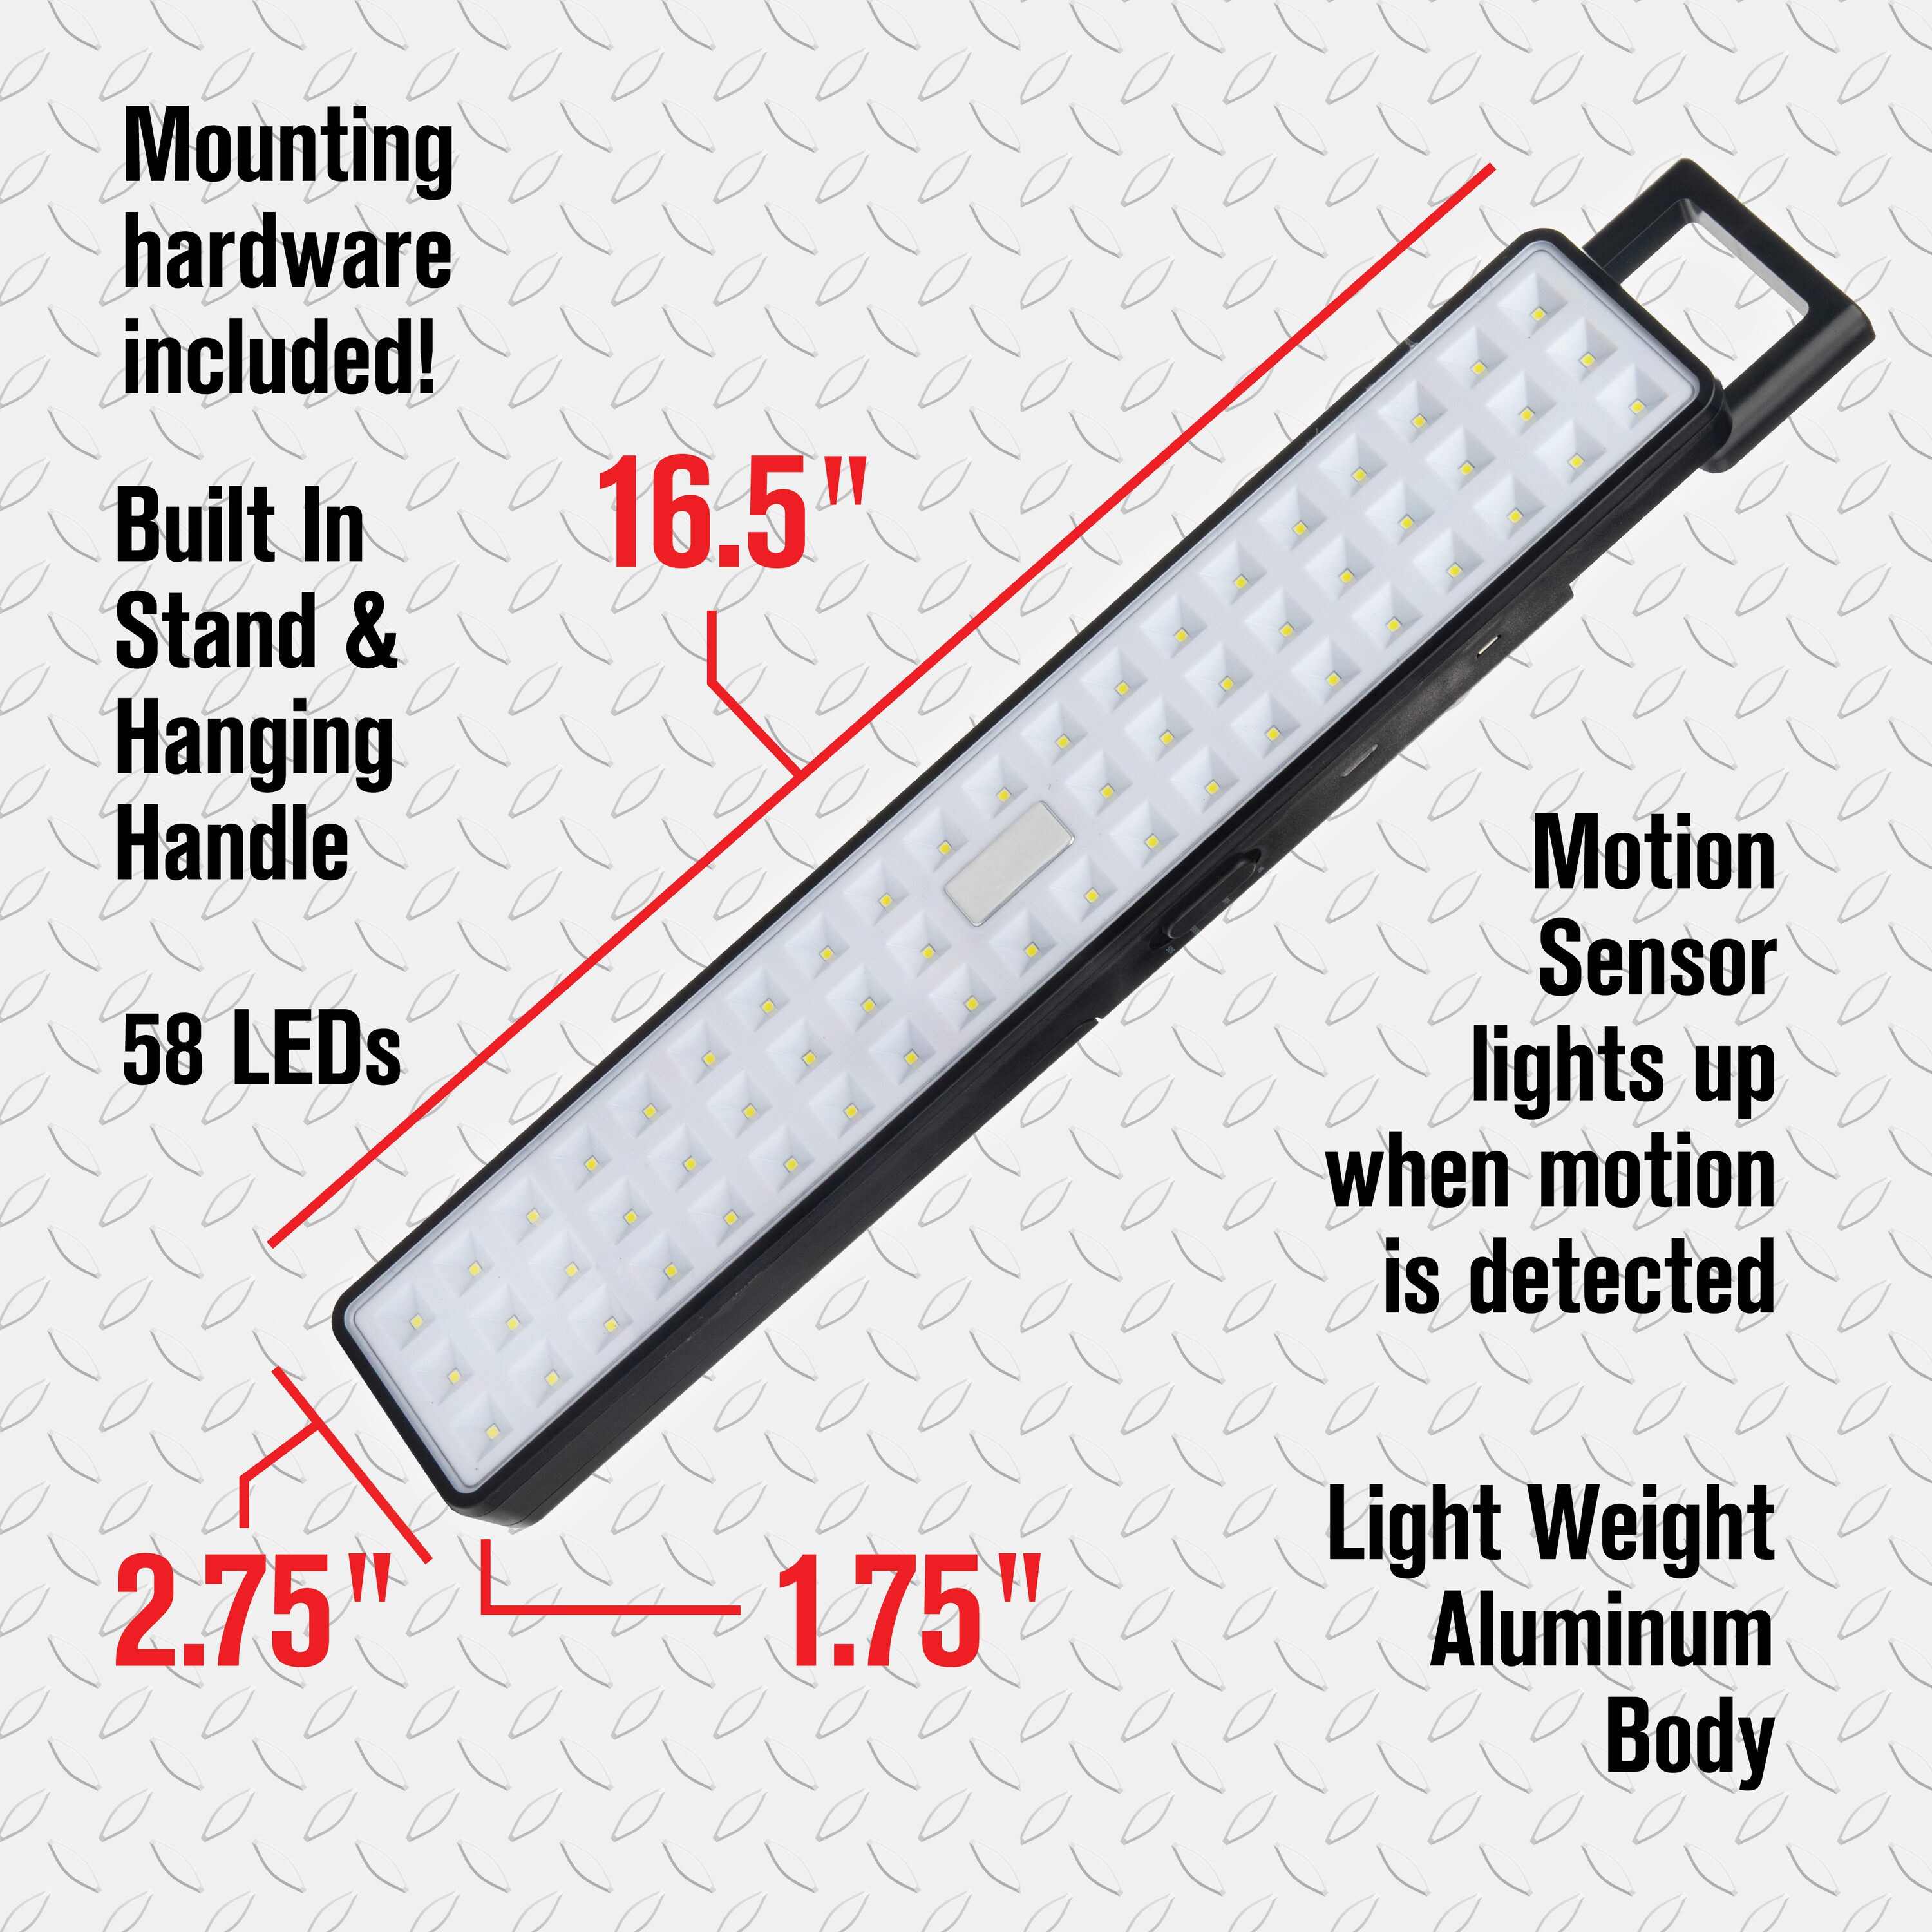 Bell + Howell Light Bar 60 LED Rechargeable Light Bar with Stand and Hanger  As Seen On TV 